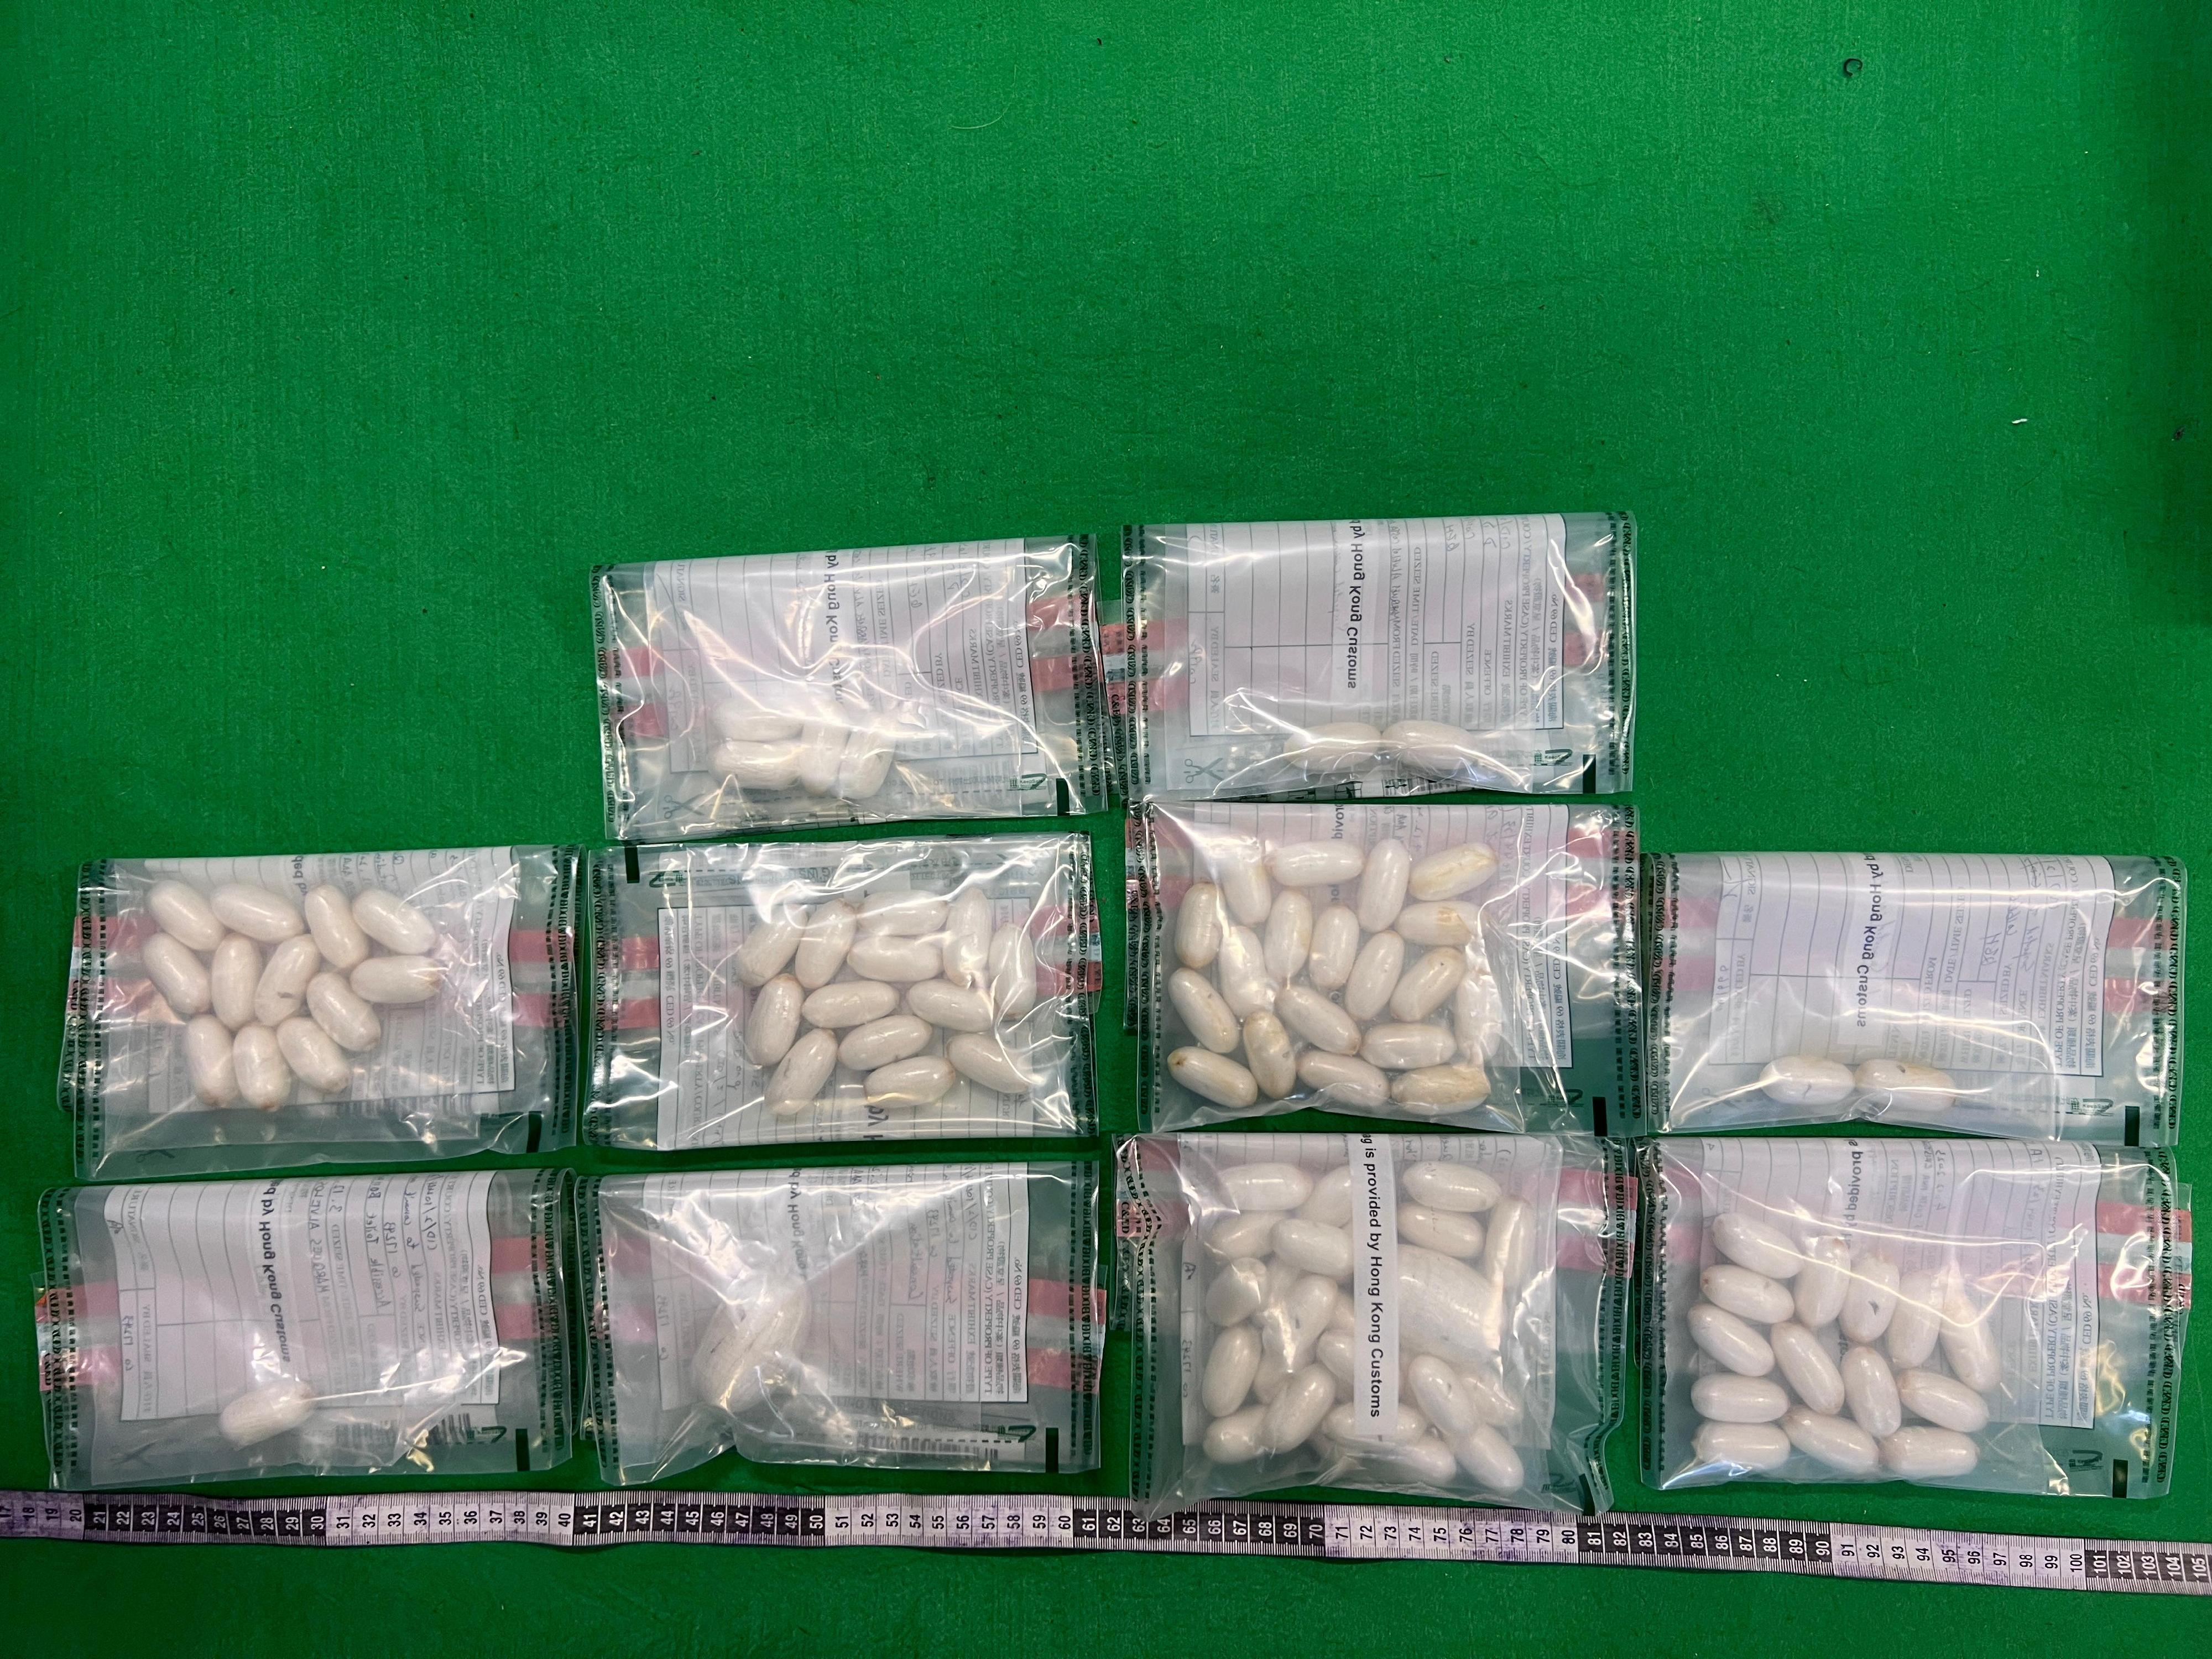 Hong Kong Customs on December 3 detected a dangerous drugs internal concealment case involving two incoming passengers at Hong Kong International Airport and seized about 1.8 kilograms of suspected cocaine with an estimated market value of about $2 million. Photo shows the suspected cocaine seized.
 
